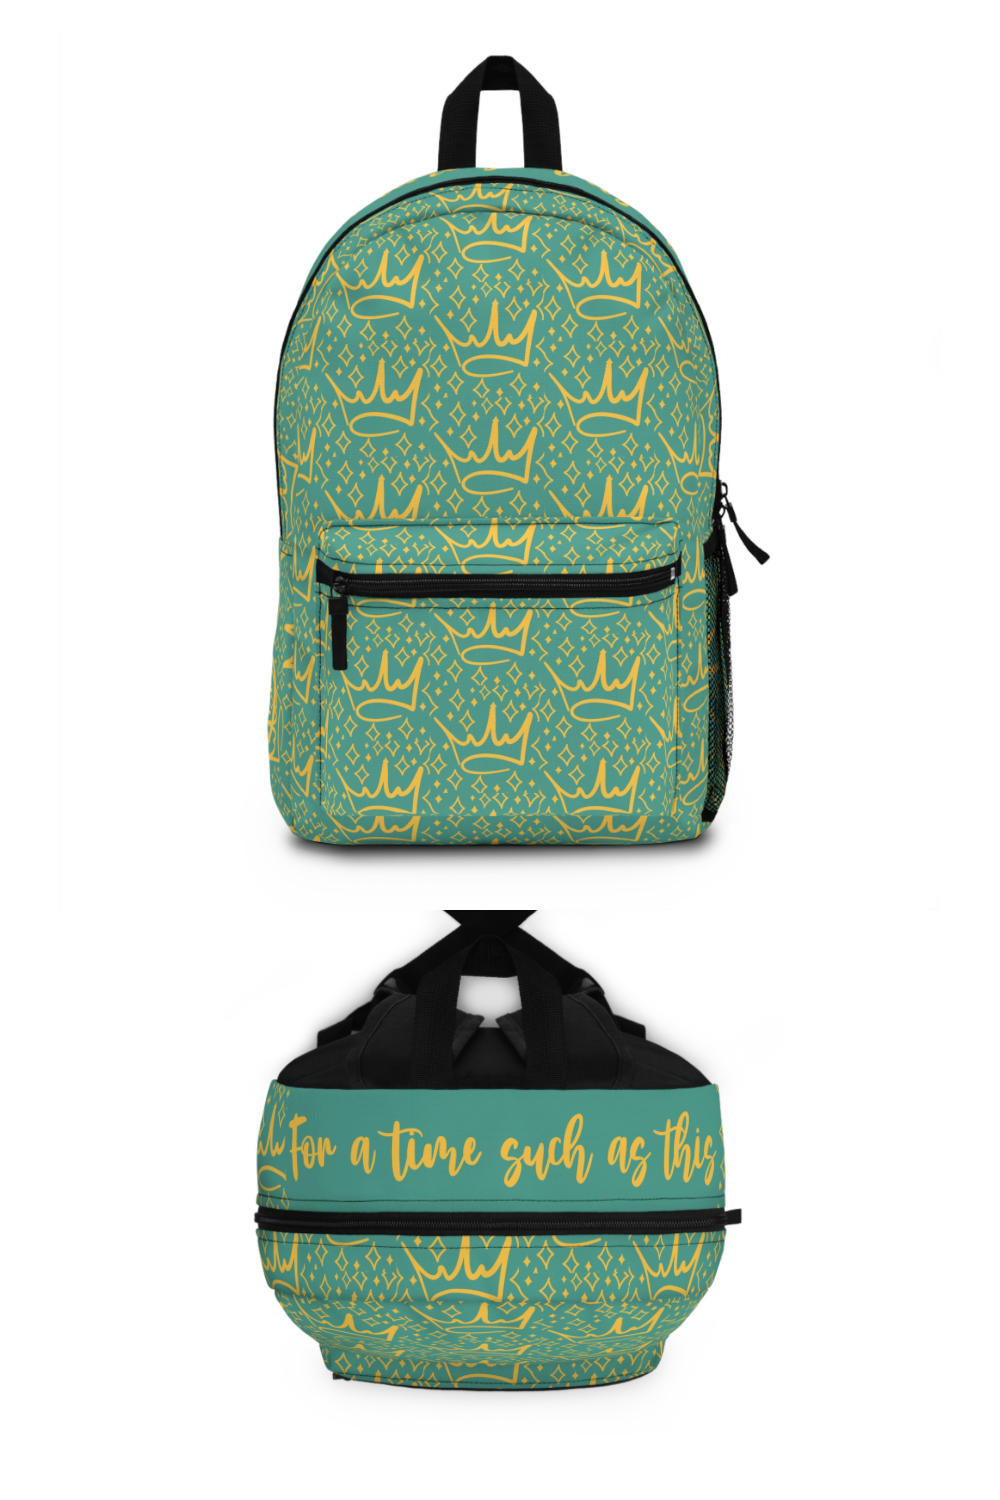 For a Time Such as This Backpack - Friends of the Faith